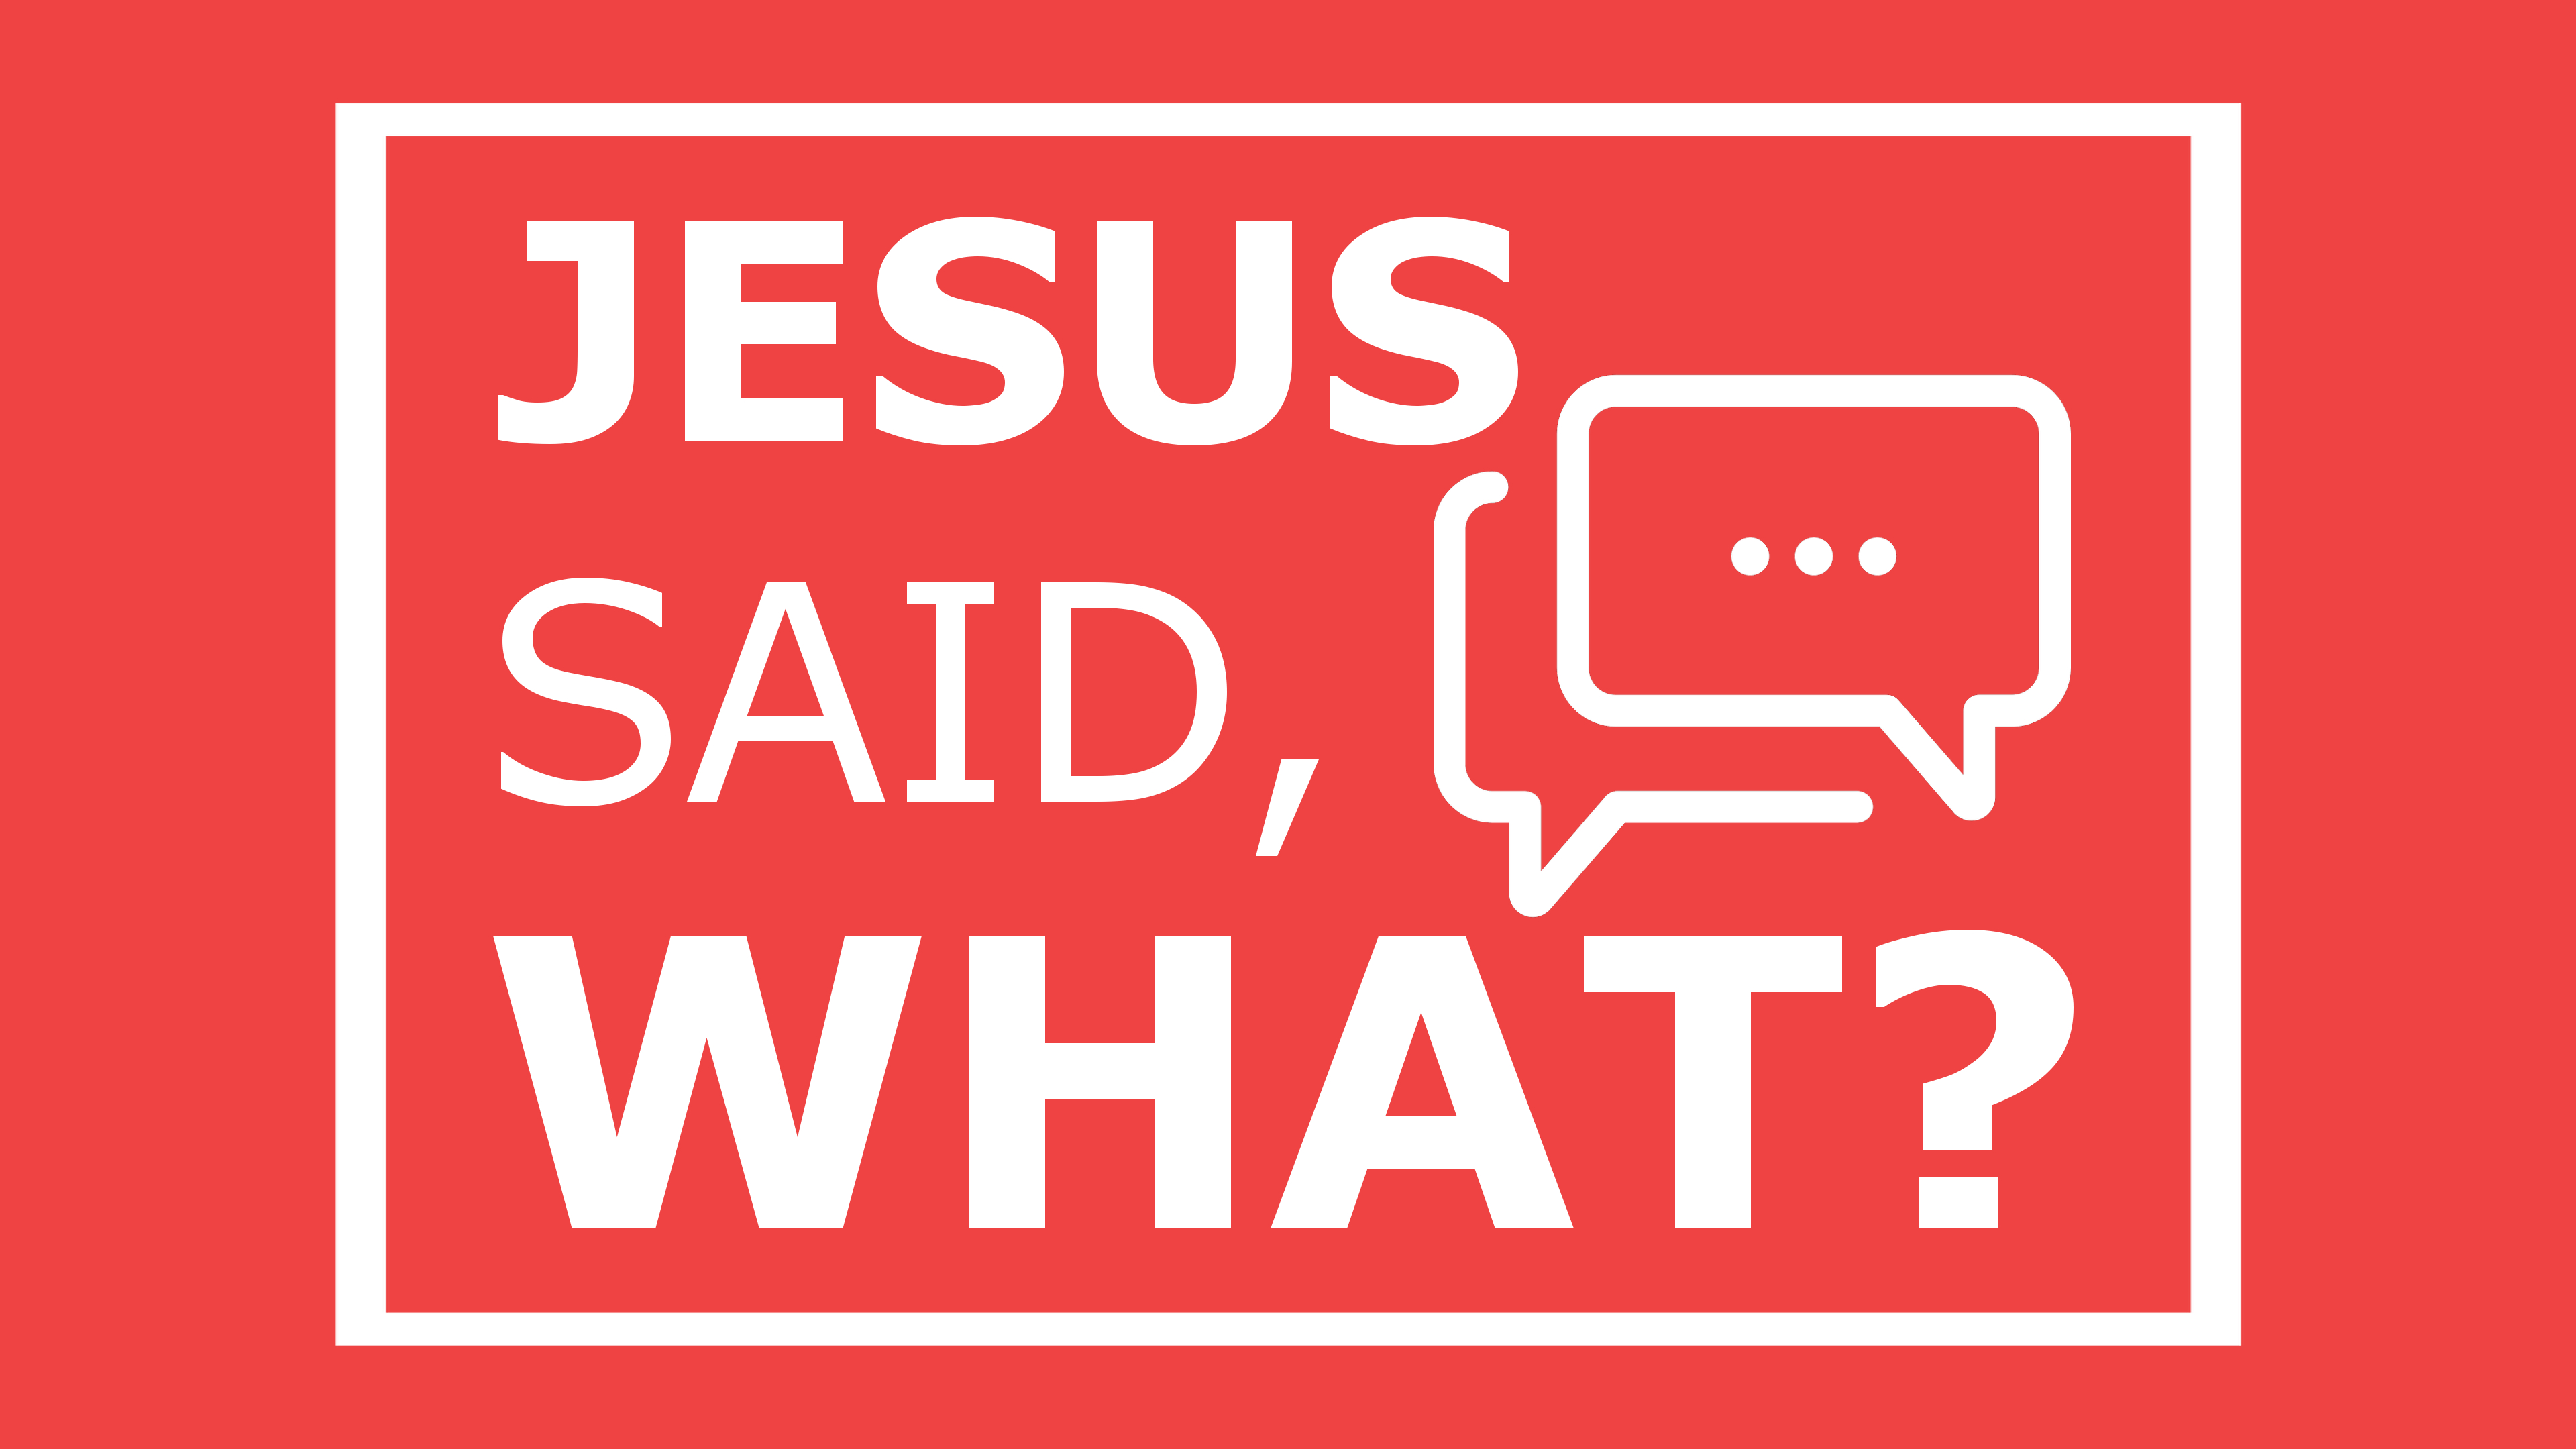 JESUS said, WHAT? | the seed and the sower